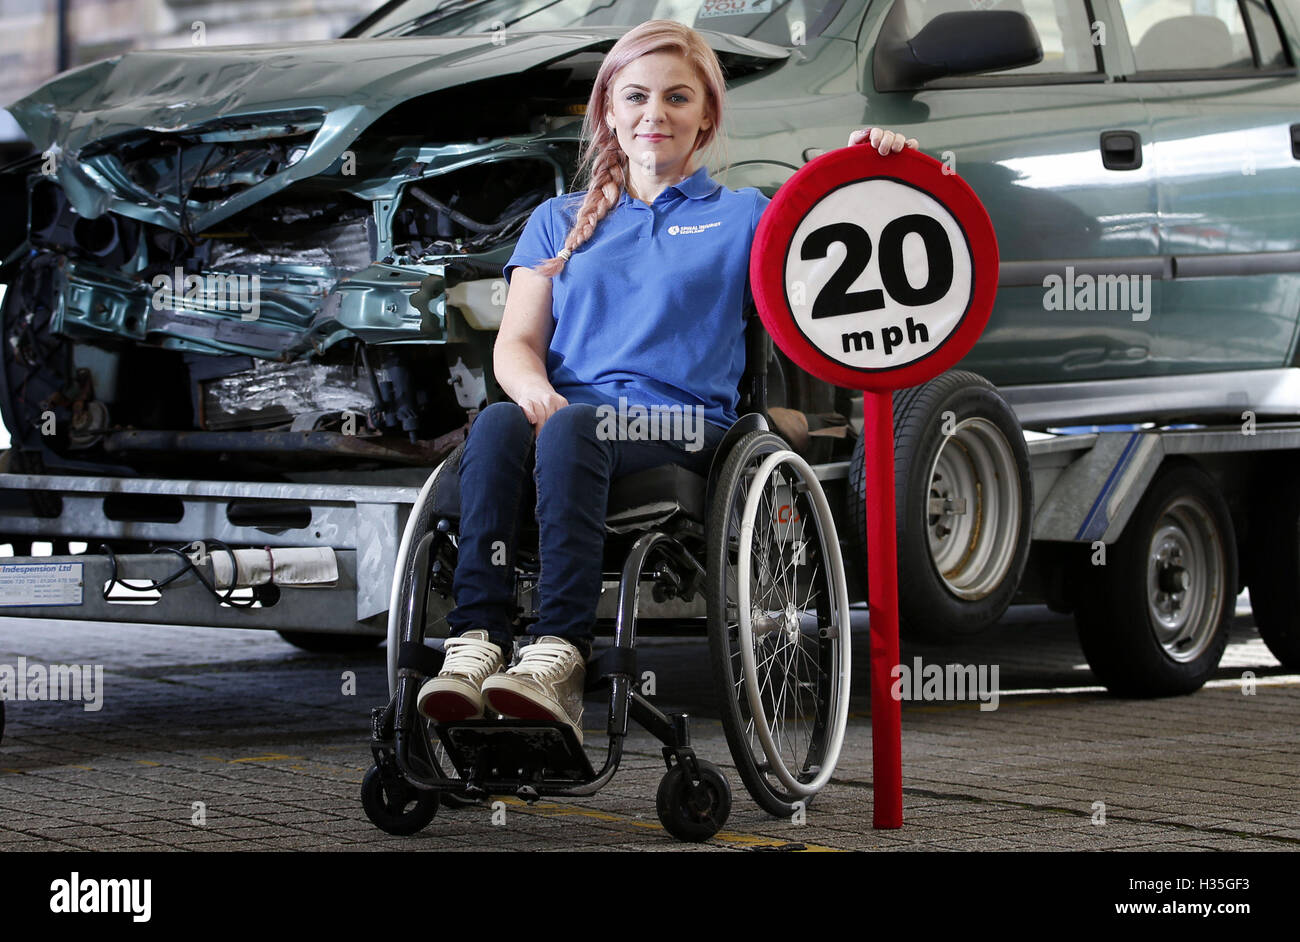 Crash survivor Laura Torrance, 33, shared her experiences to highlight road safety at Streets Ahead Edinburgh Young Drivers, a multi-agency road safety education event in Edinburgh. Stock Photo